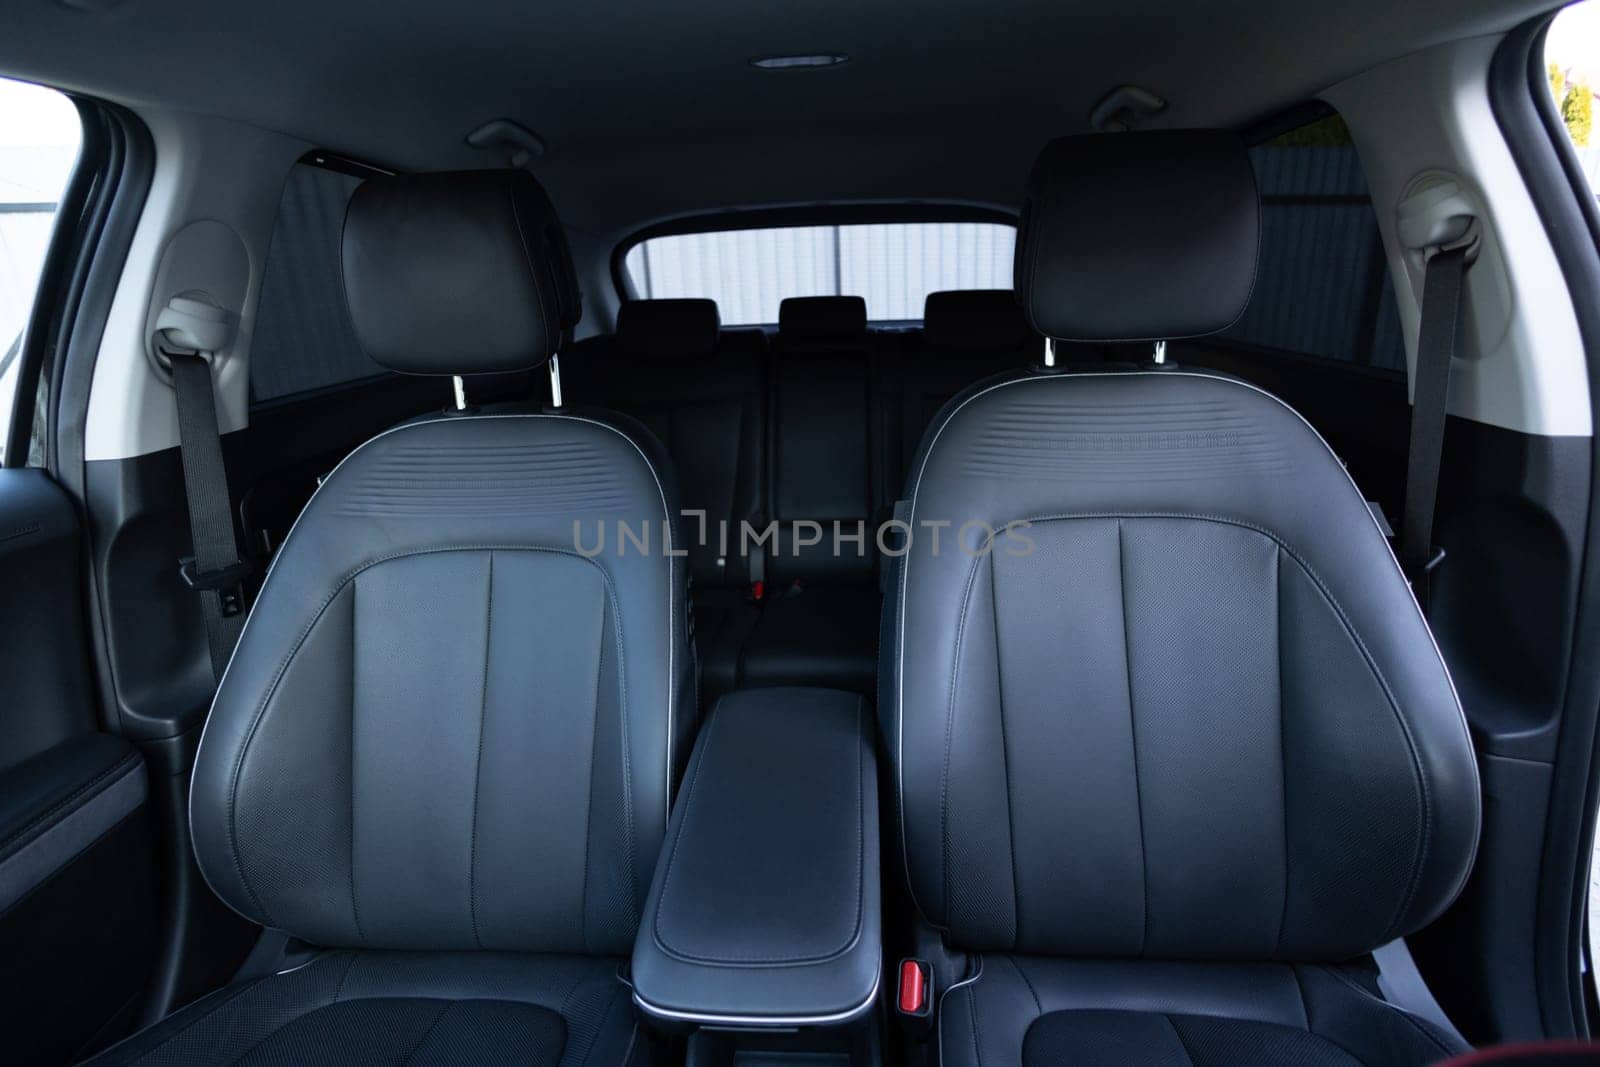 Luxury car leather seats. Interior of new modern clean expensive car. Passenger seats with leather. Closeup details. New car inside. Car cleaning theme by uflypro